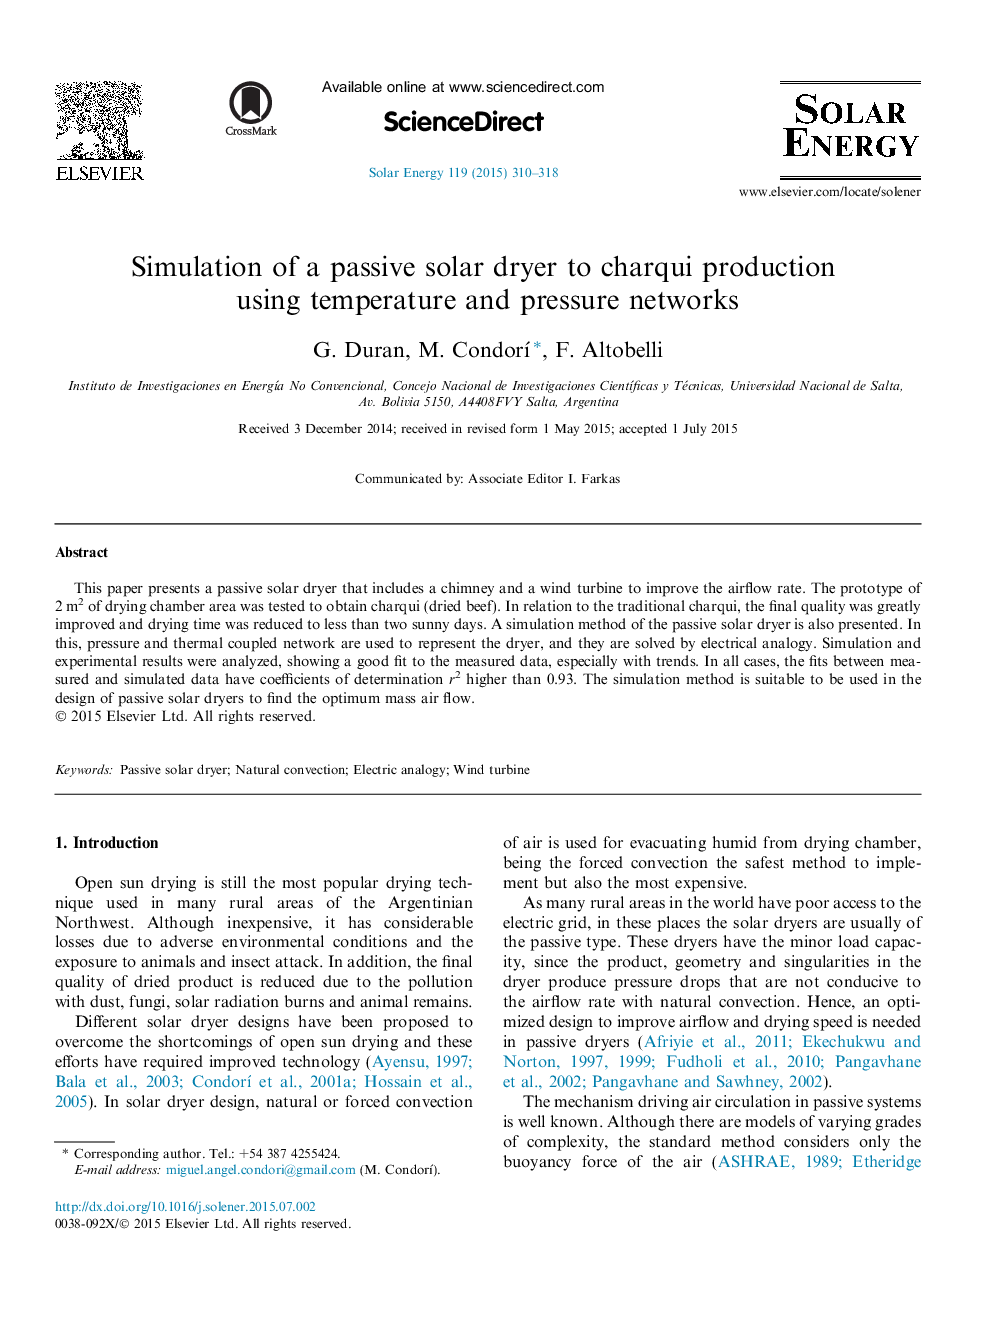 Simulation of a passive solar dryer to charqui production using temperature and pressure networks